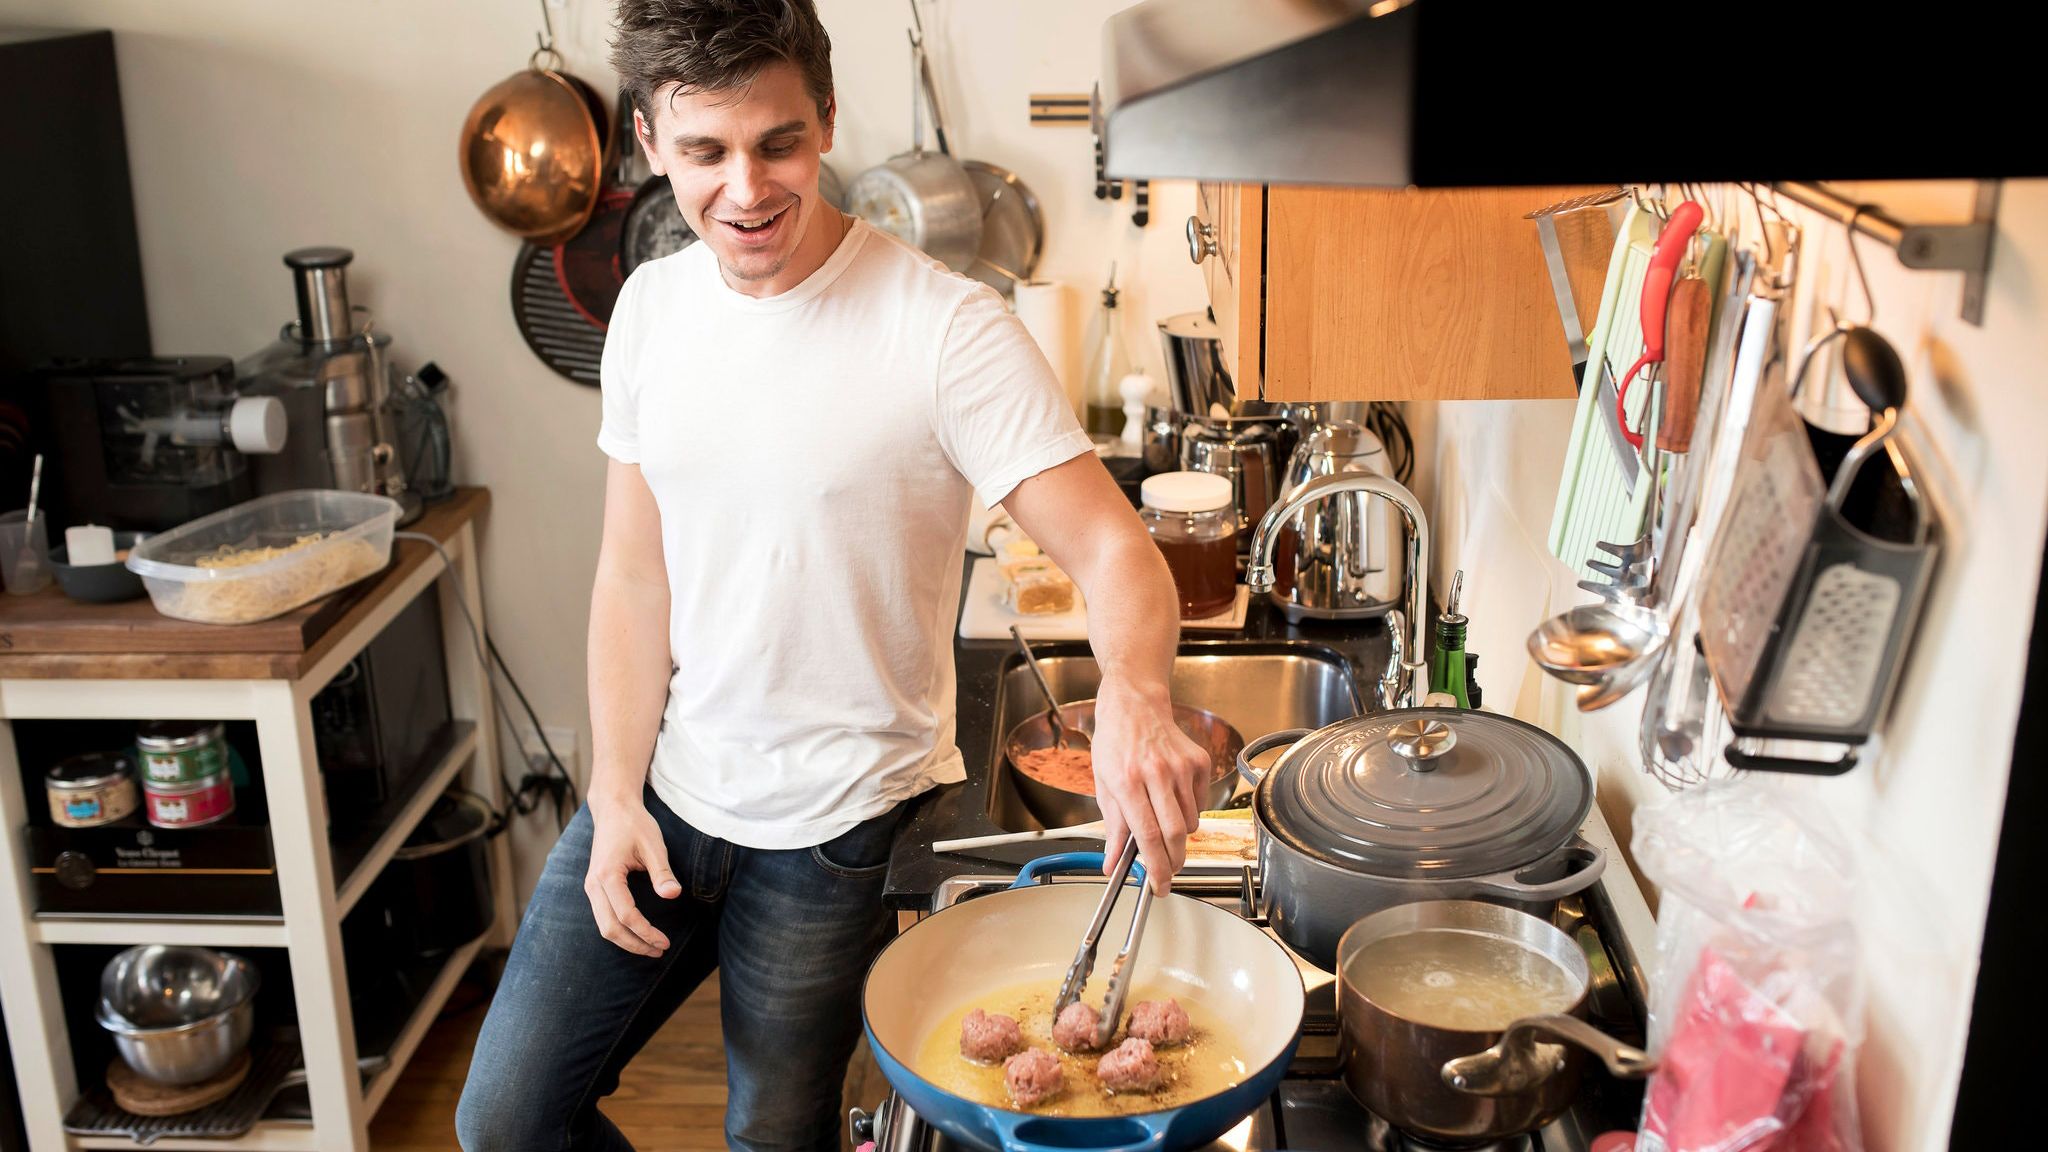 Le Creuset on Twitter: "Make joy in the kitchen with timeless recipes and classic cookware (and @Antoni, of course). 🍝 your favorite food memory? 📸 by @KarstenMoran for the @NYTimes #LeCreuset